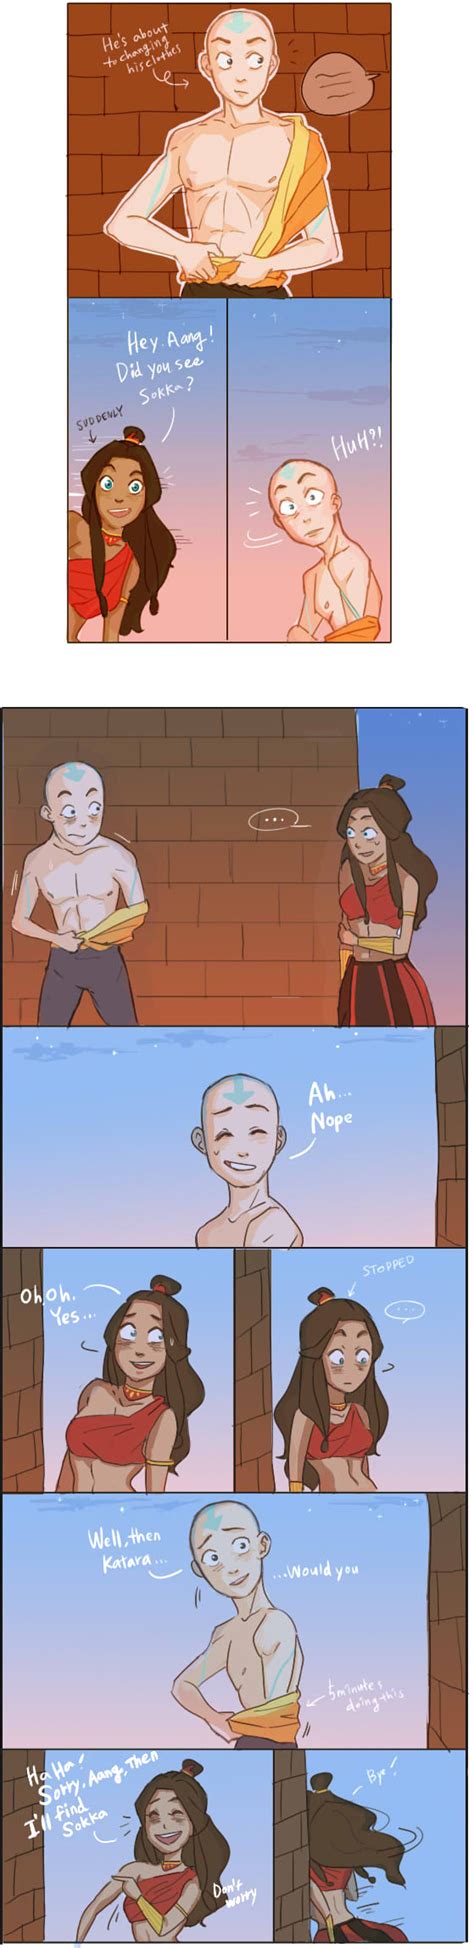 Kataang Comic Maybe He 1 By PsycheJ93 On DeviantArt